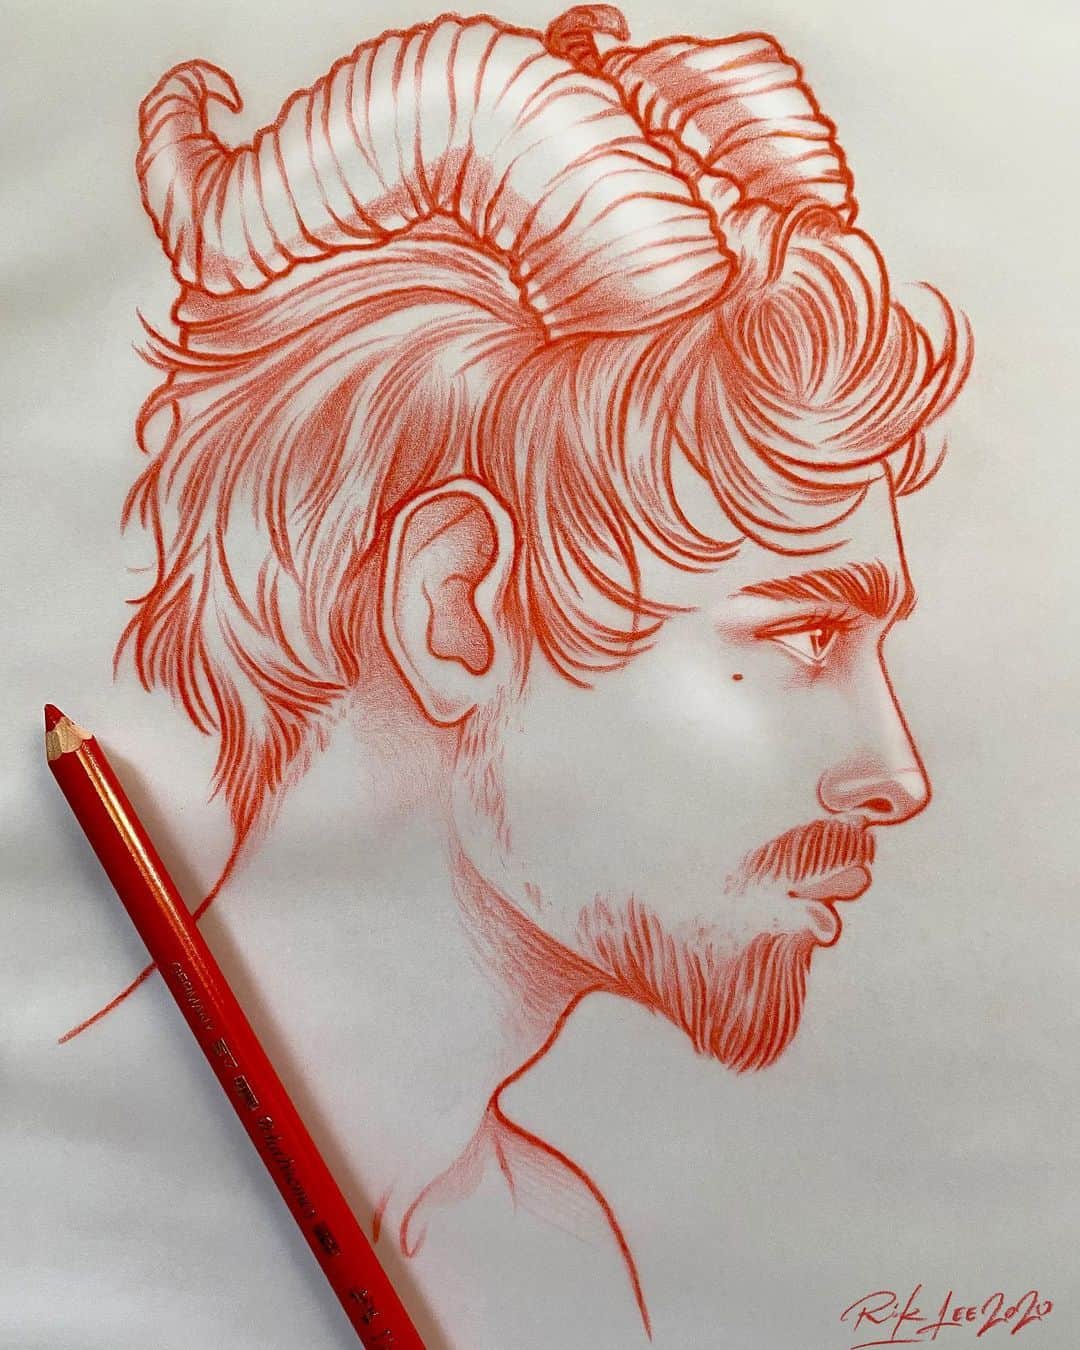 Rik Leeのインスタグラム：「Sketching the next piece in my zodiac series. I think you’ll be able to guess his sign? . #riklee #illustration #zodiac #zodiacsigns #horoscope #starsigns #art #design #capricorn #goat #seagoat #portrait」